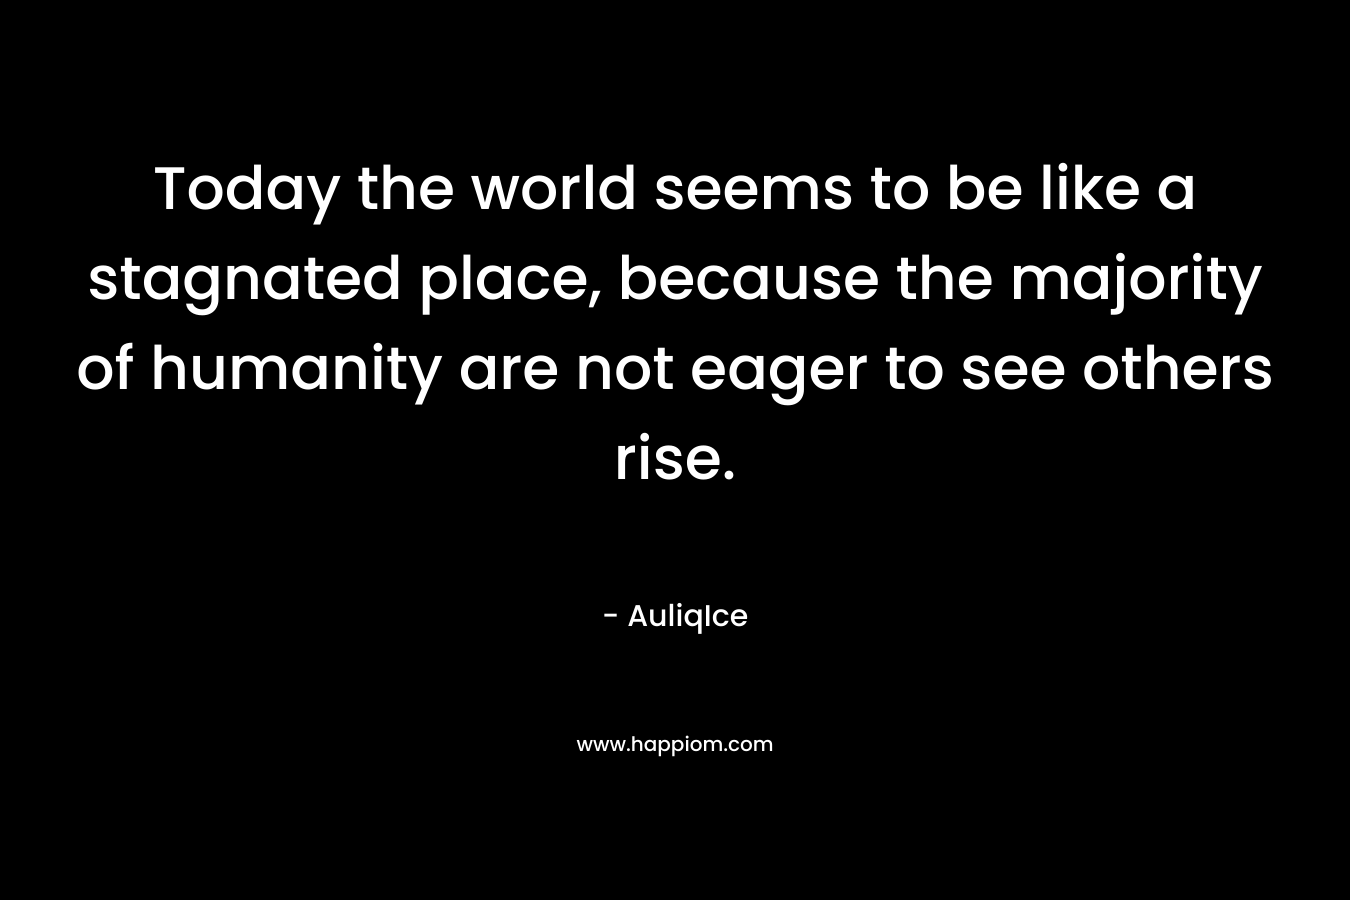 Today the world seems to be like a stagnated place, because the majority of humanity are not eager to see others rise. – AuliqIce